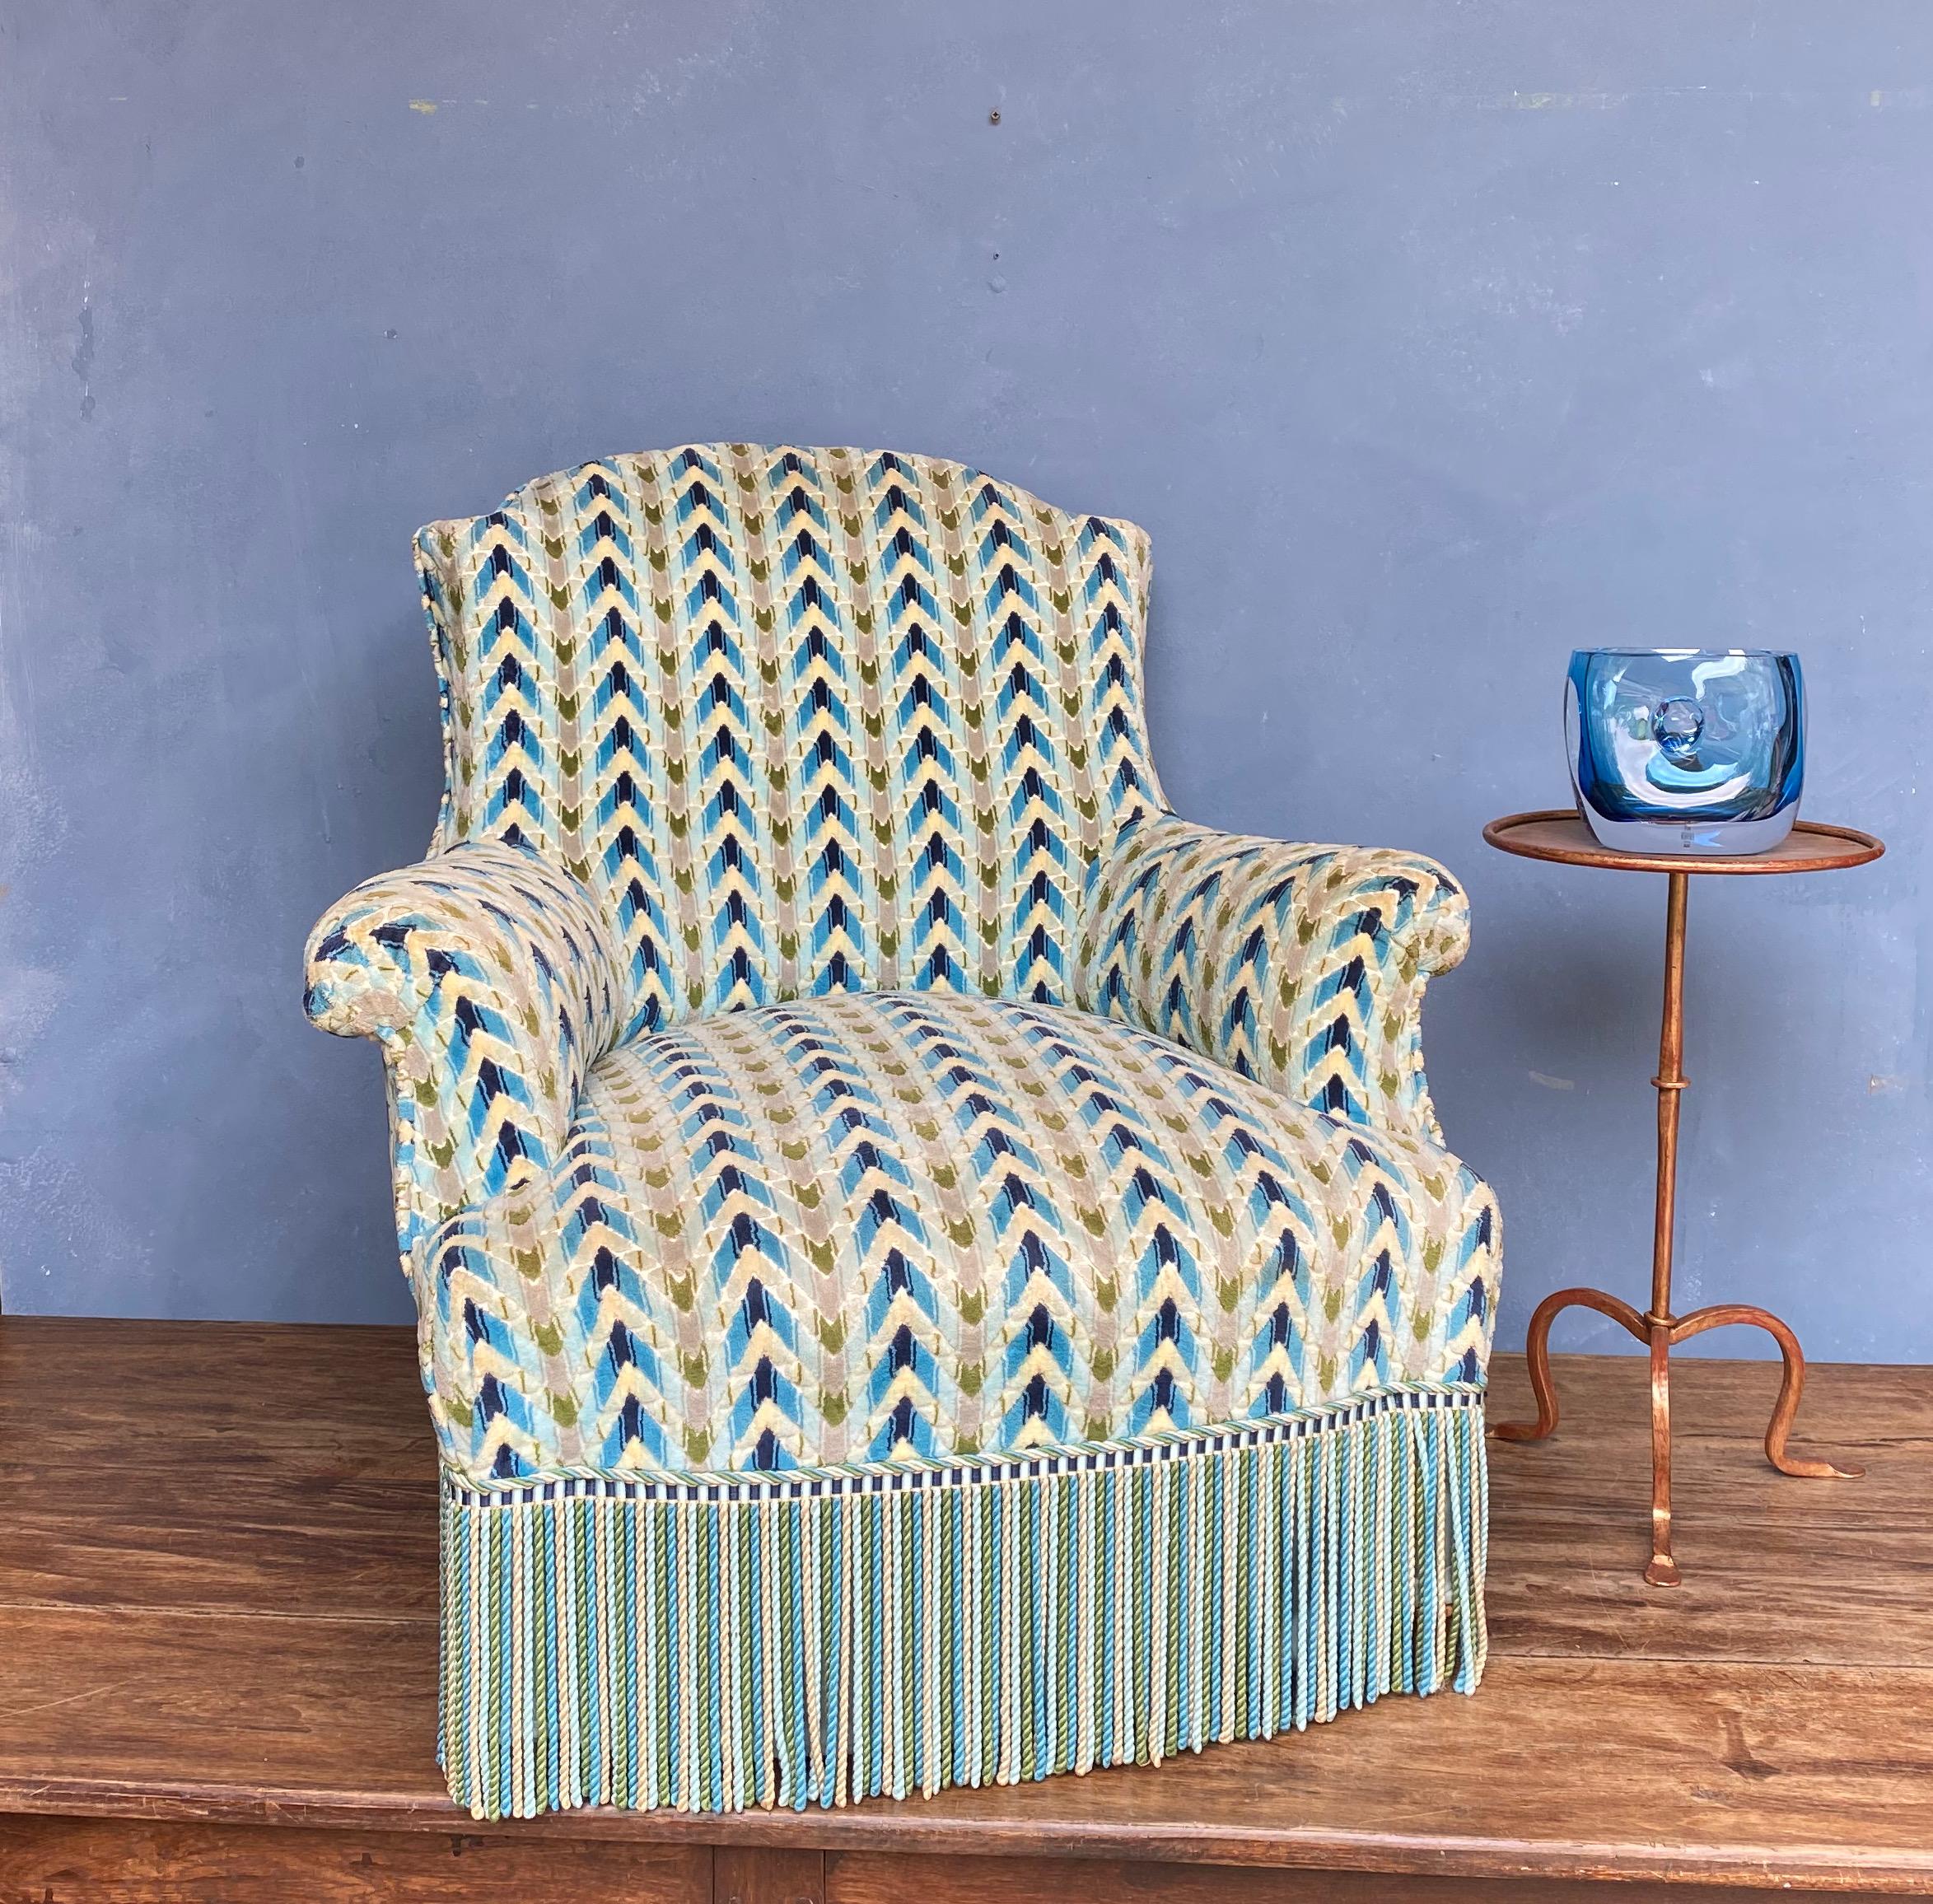 French 19th century Napoleon III arm chair upholstered in a blue, green and white geometric patterned velvet with contrasting bullion fringe. The chair is in good condition but the fabric does show signs of use and age. Sold as is. 

Dimensions: